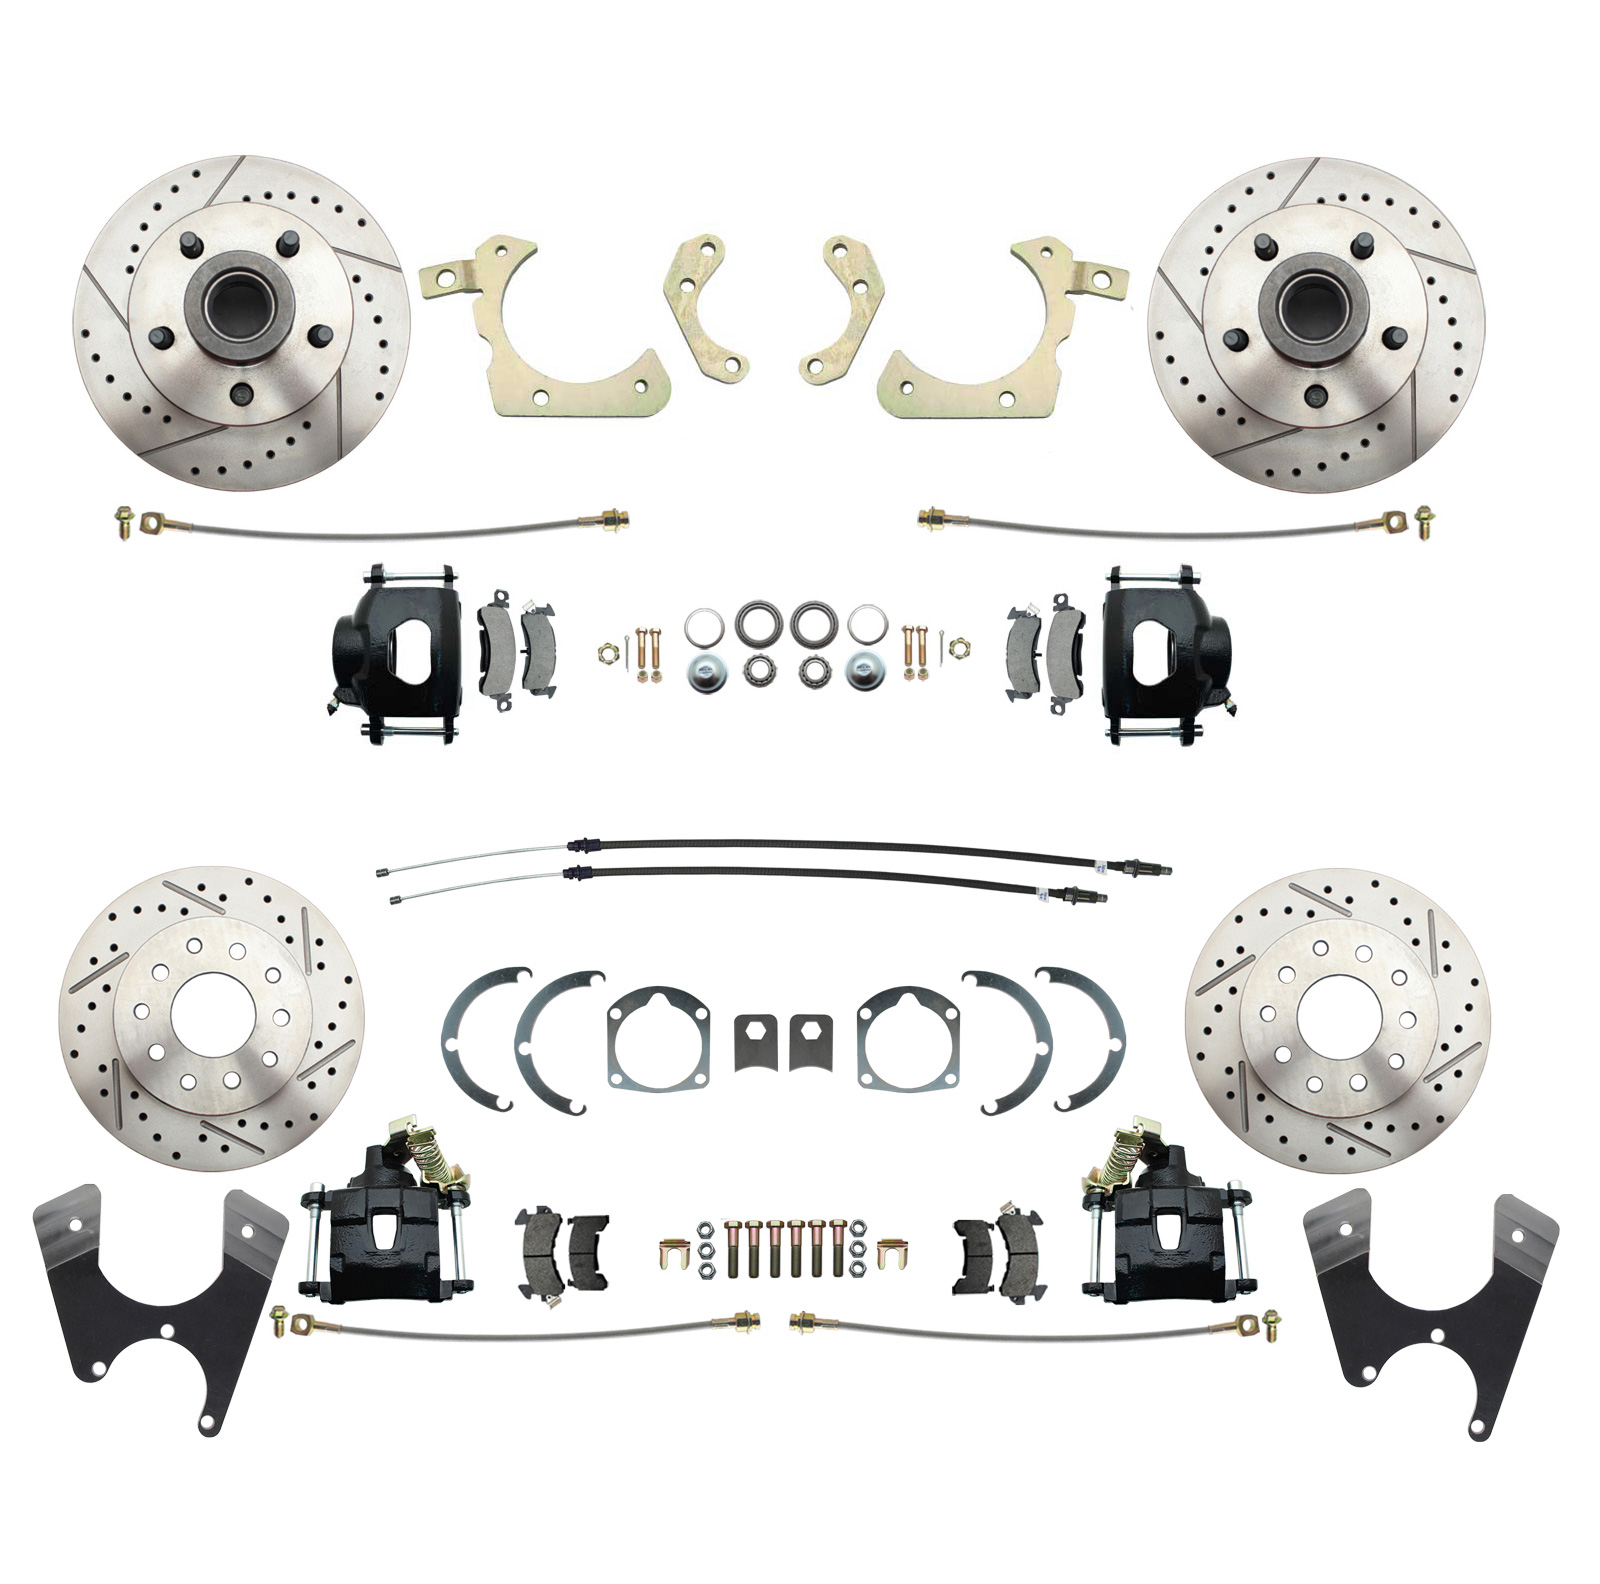 1955-1958 GM Full Size Front & Rear  Disc Brake Kit Black Powder Coated Calipers Drilled/Slotted Rotors (Impala, Bel Air, Biscayne)